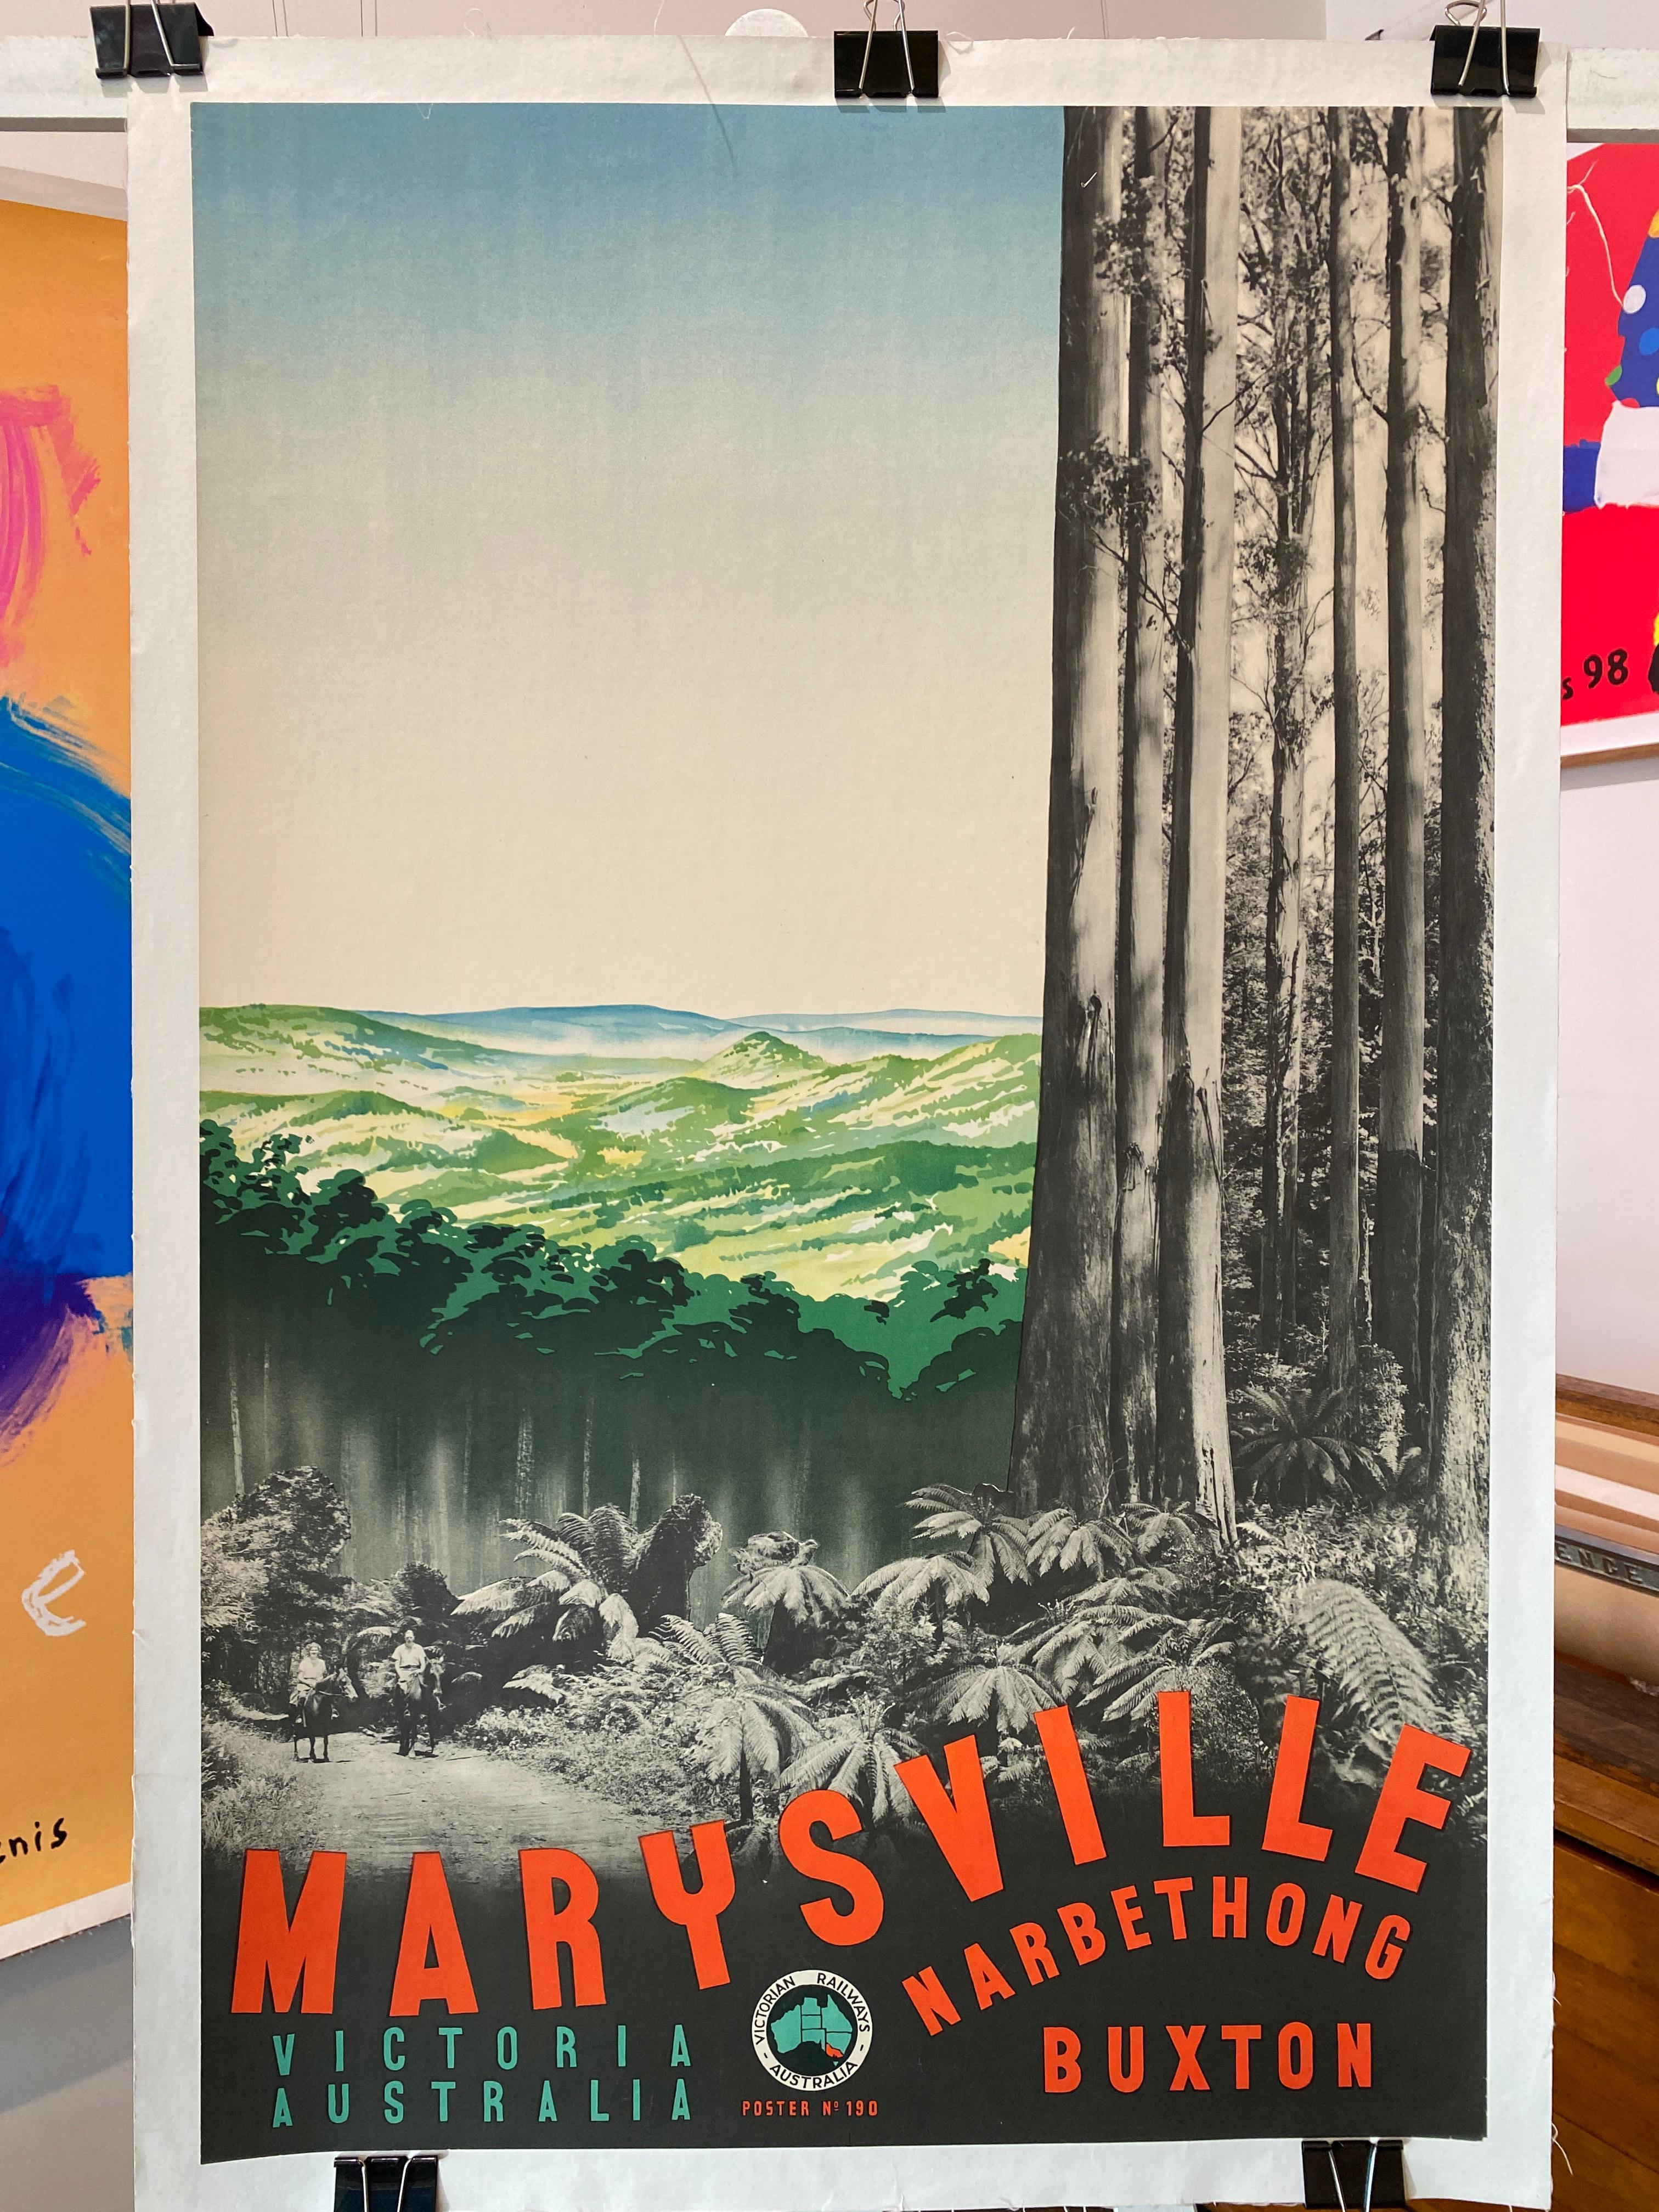 This original poster was created to promote tourism to the Australian town of Marysville. At that time, the main mode of transportation was via train. Much later, as people began to drive, the train tracks were removed to make way for motorcars.